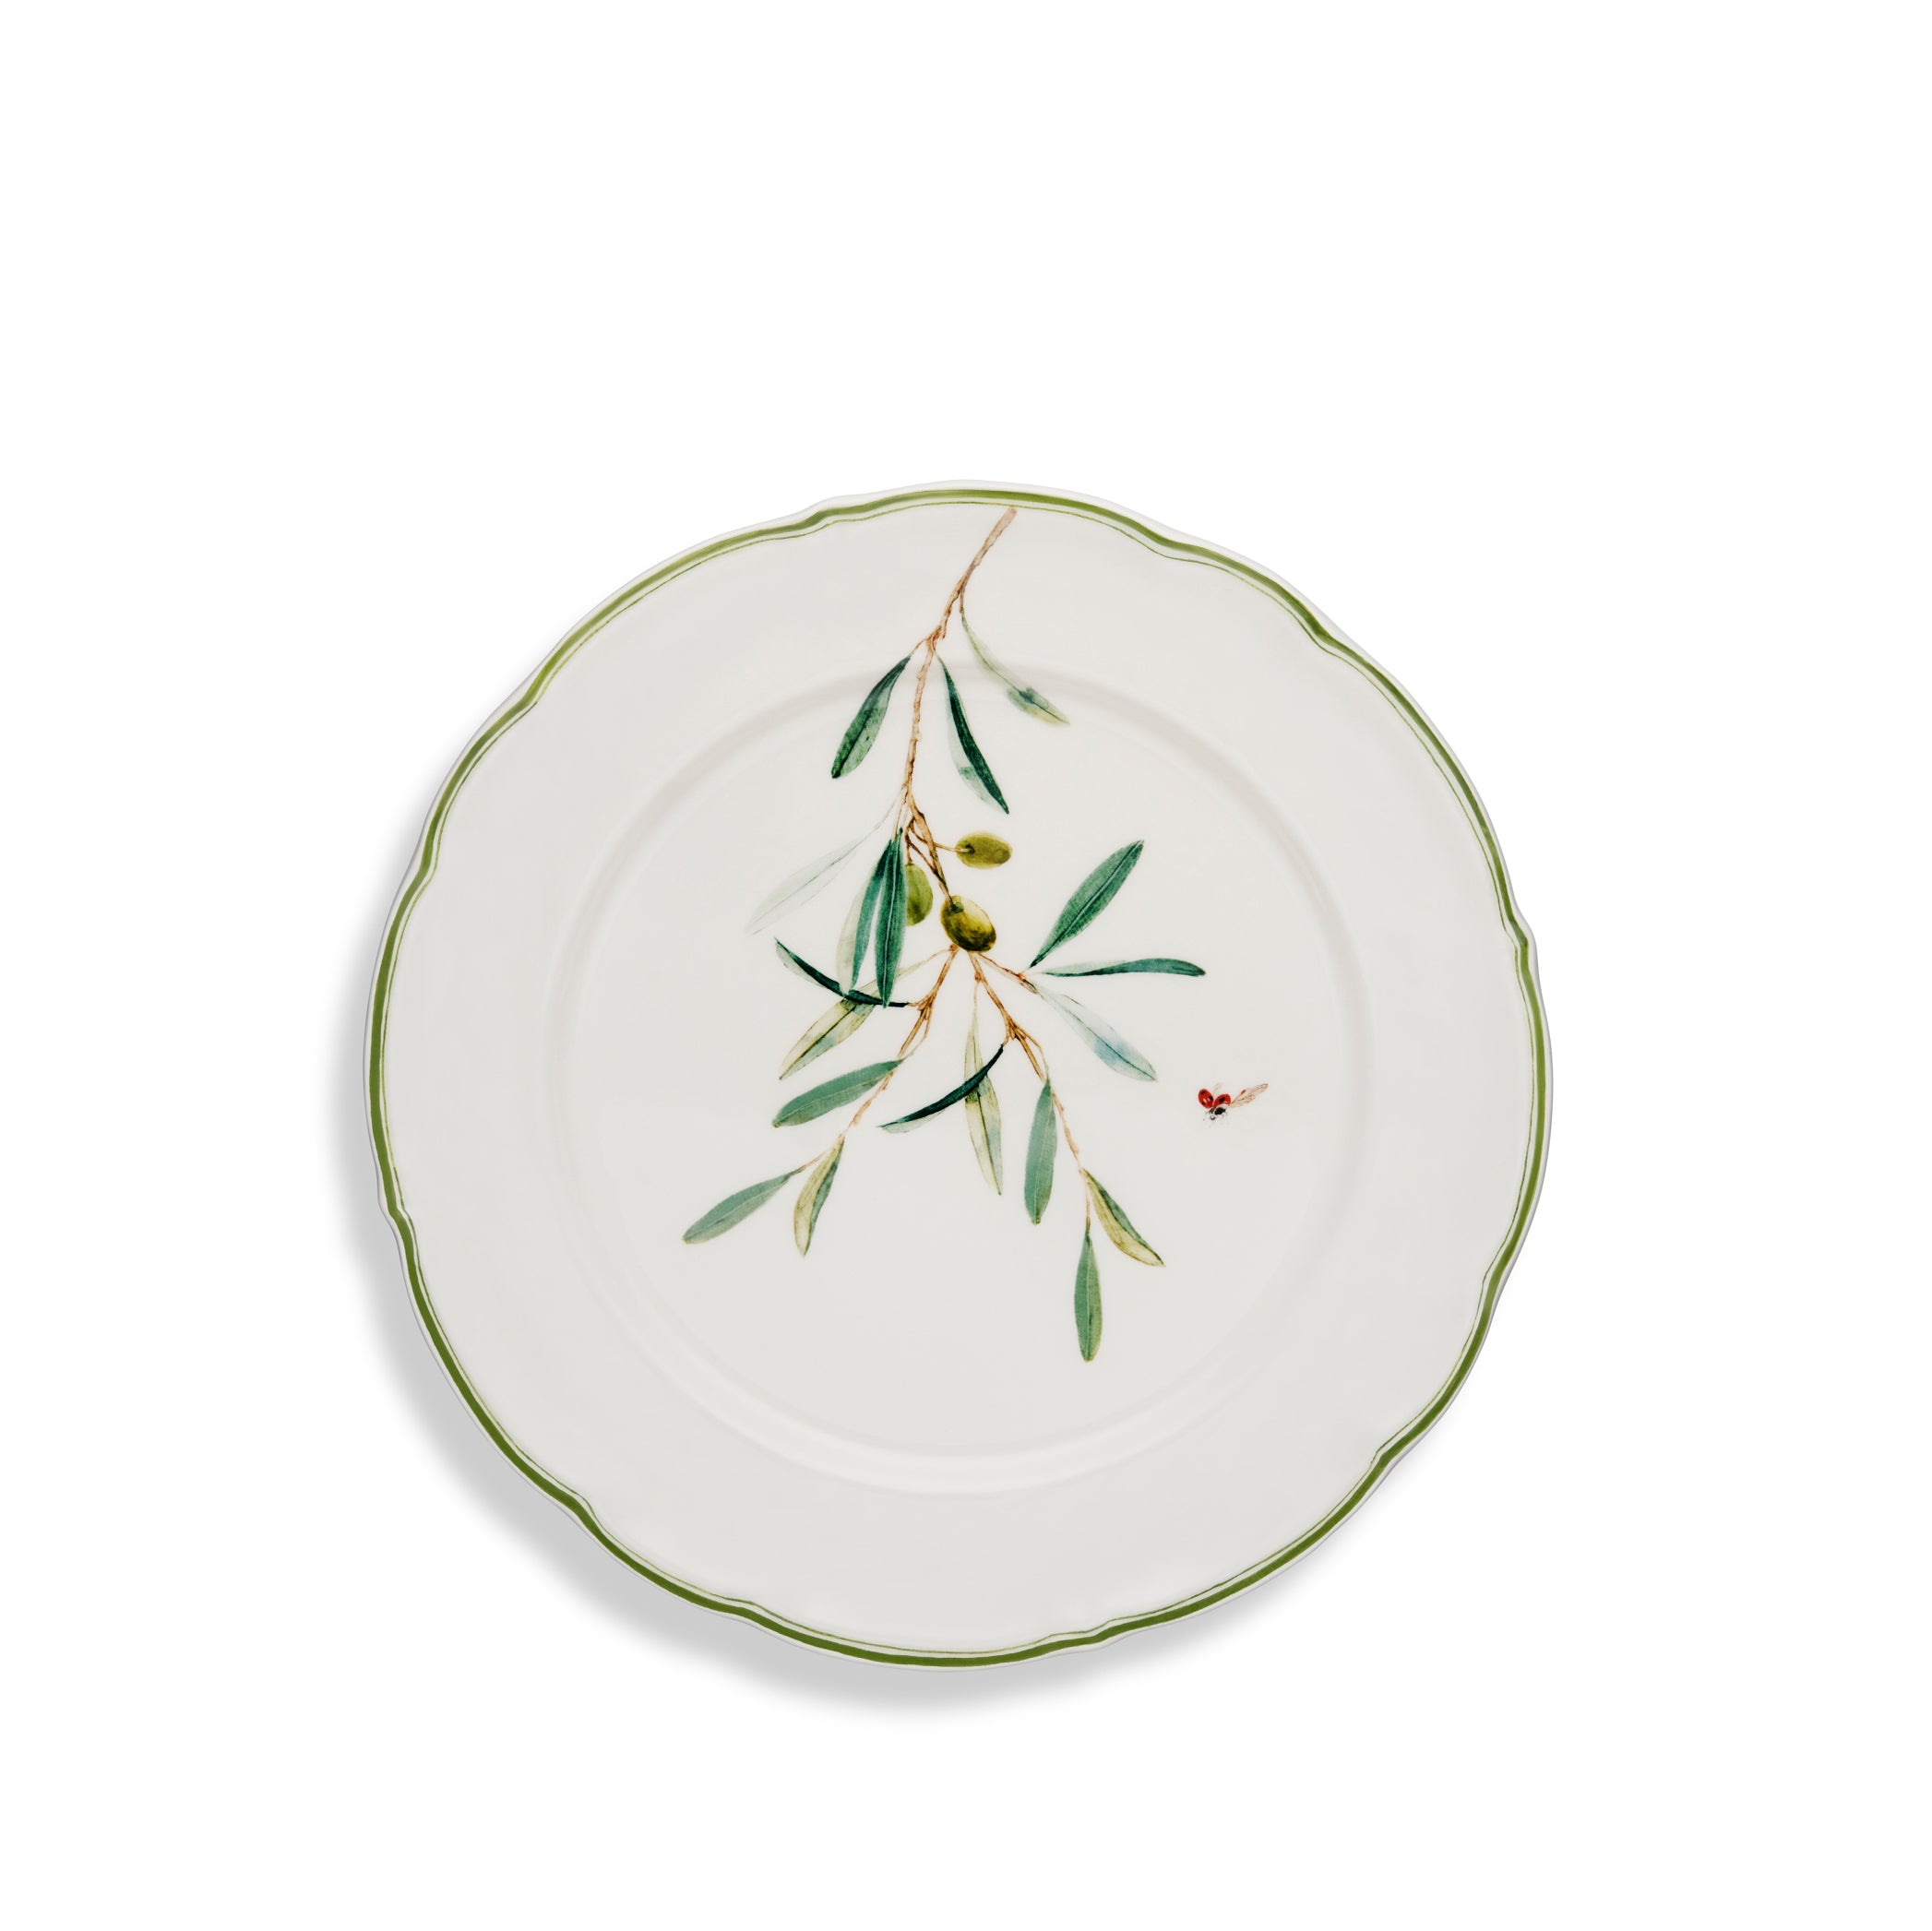 Olive Branch Scalloped Dinner Plate With Ladybird, 26cm